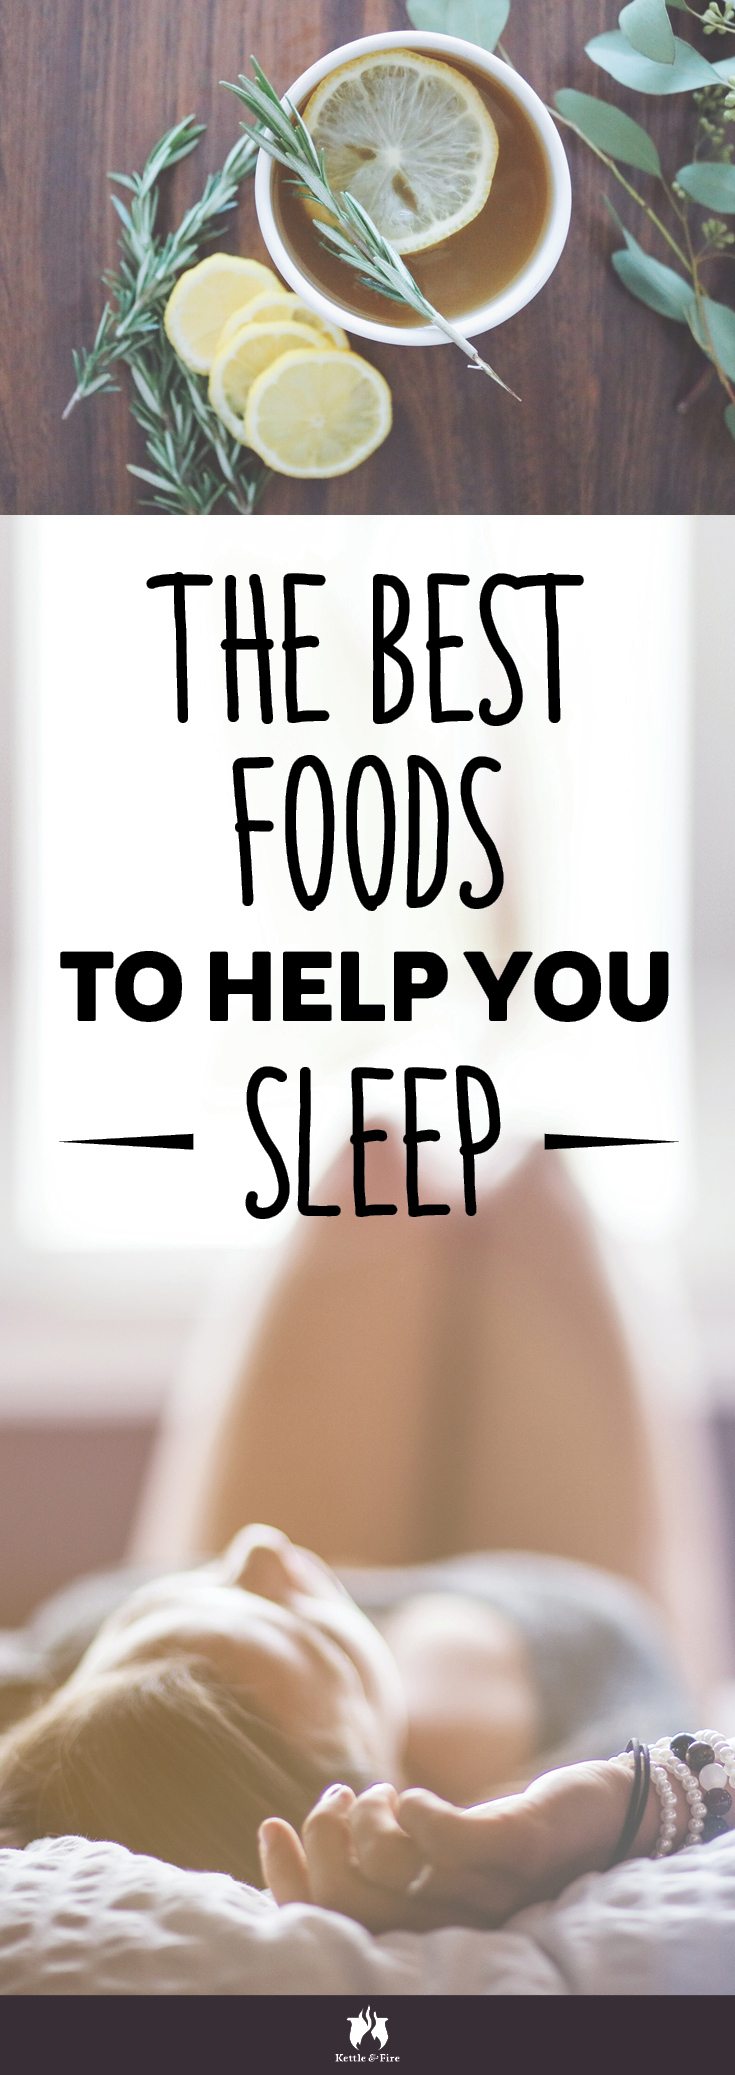 How easily you fall asleep and the quality of sleep you get can be affected by what you eat. Here's a list of the best foods that help you sleep.